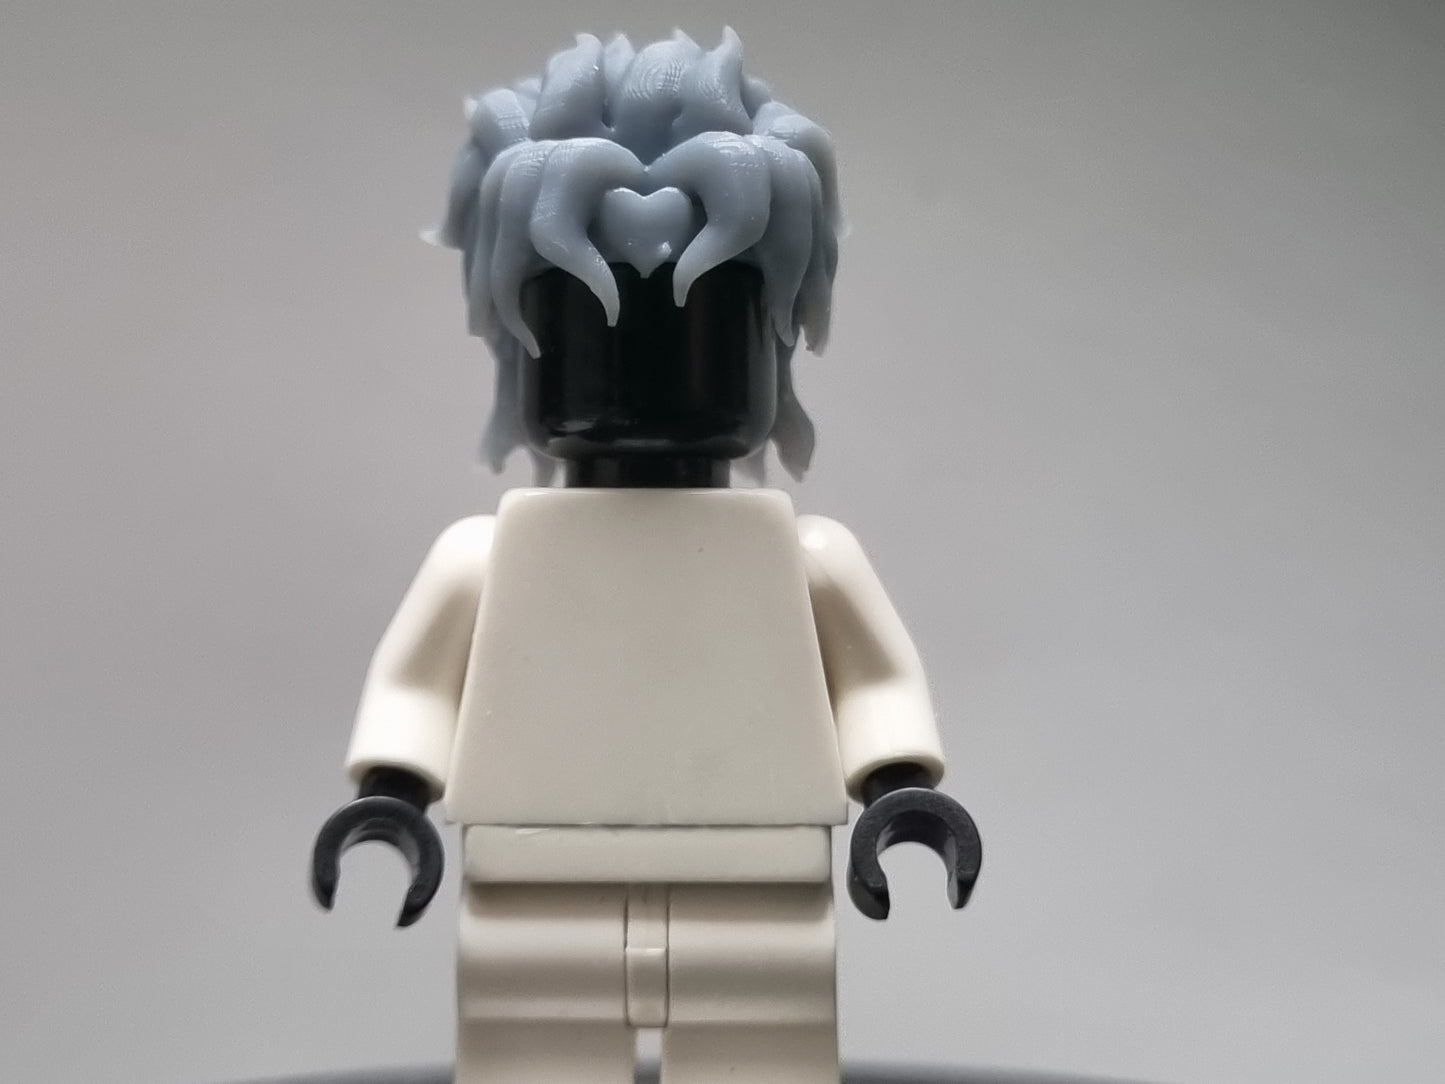 Lego compatible 3D printed custom bizzare hairpack!